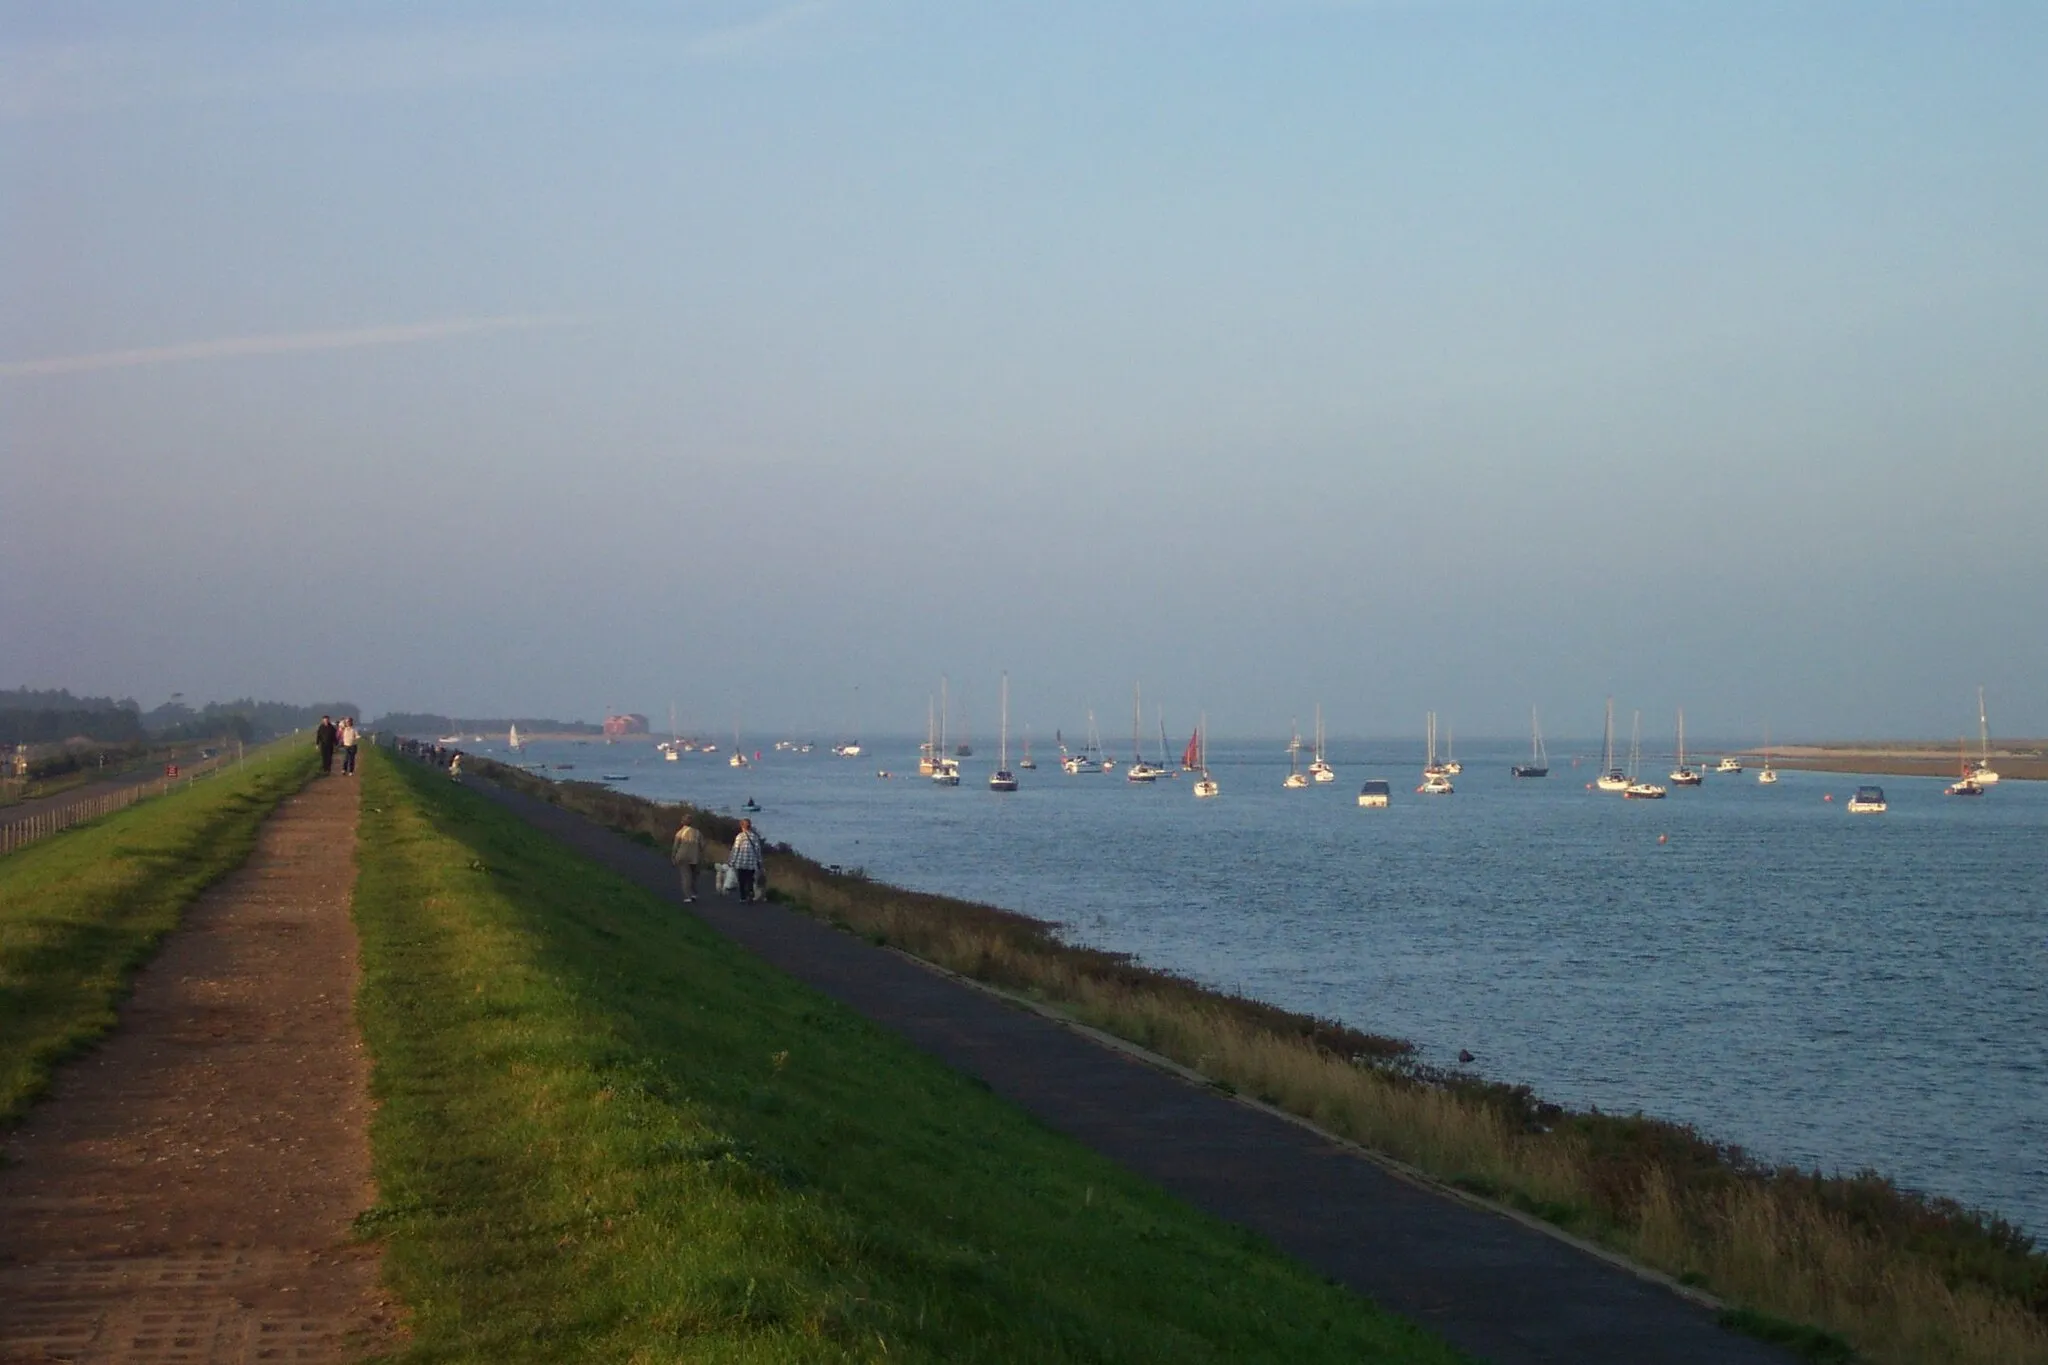 Photo showing: The harbour mouth at Wells-next-the-sea, viewed from the embankment. For more information see the Wikipedia article Wells-next-the-Sea.